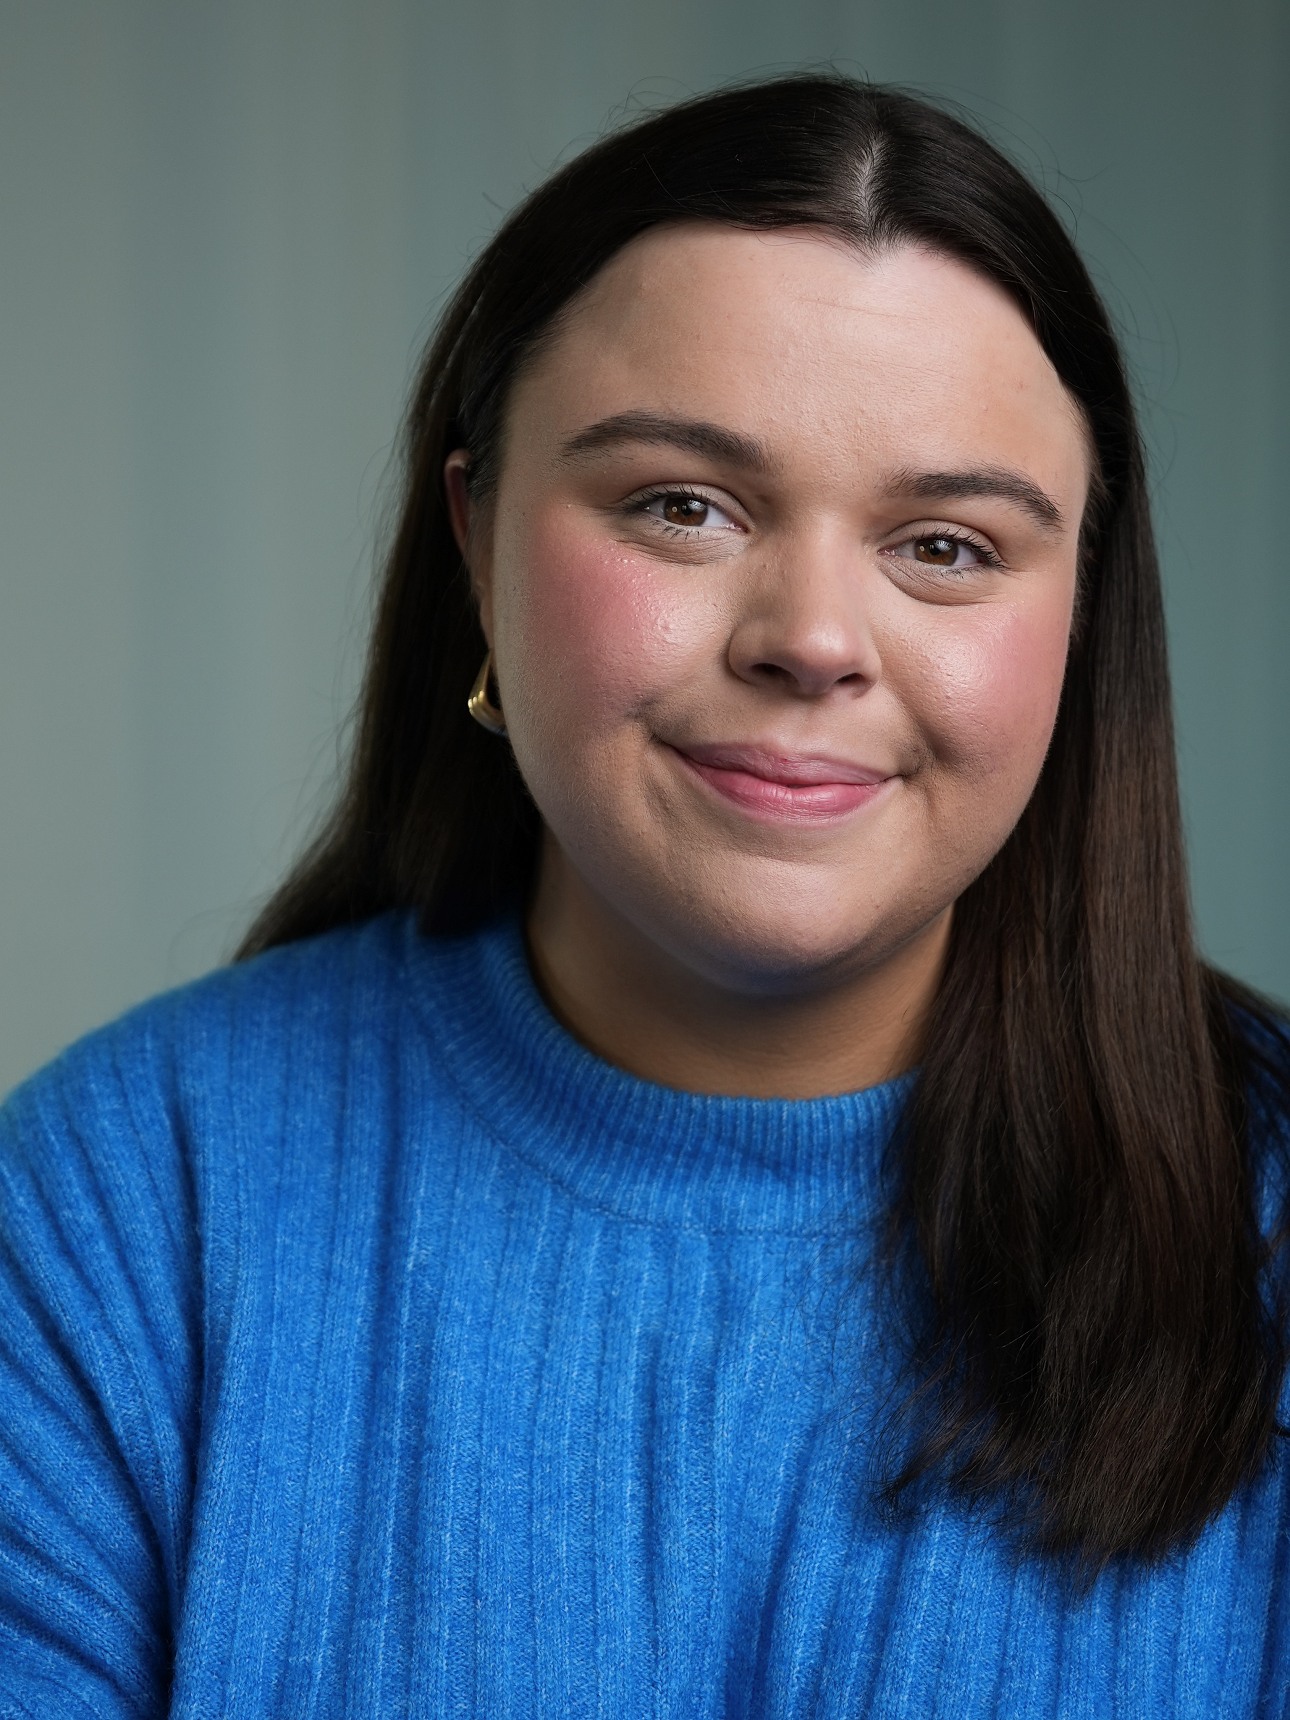 Girl with brown hair and blue jumper - an actors headshot